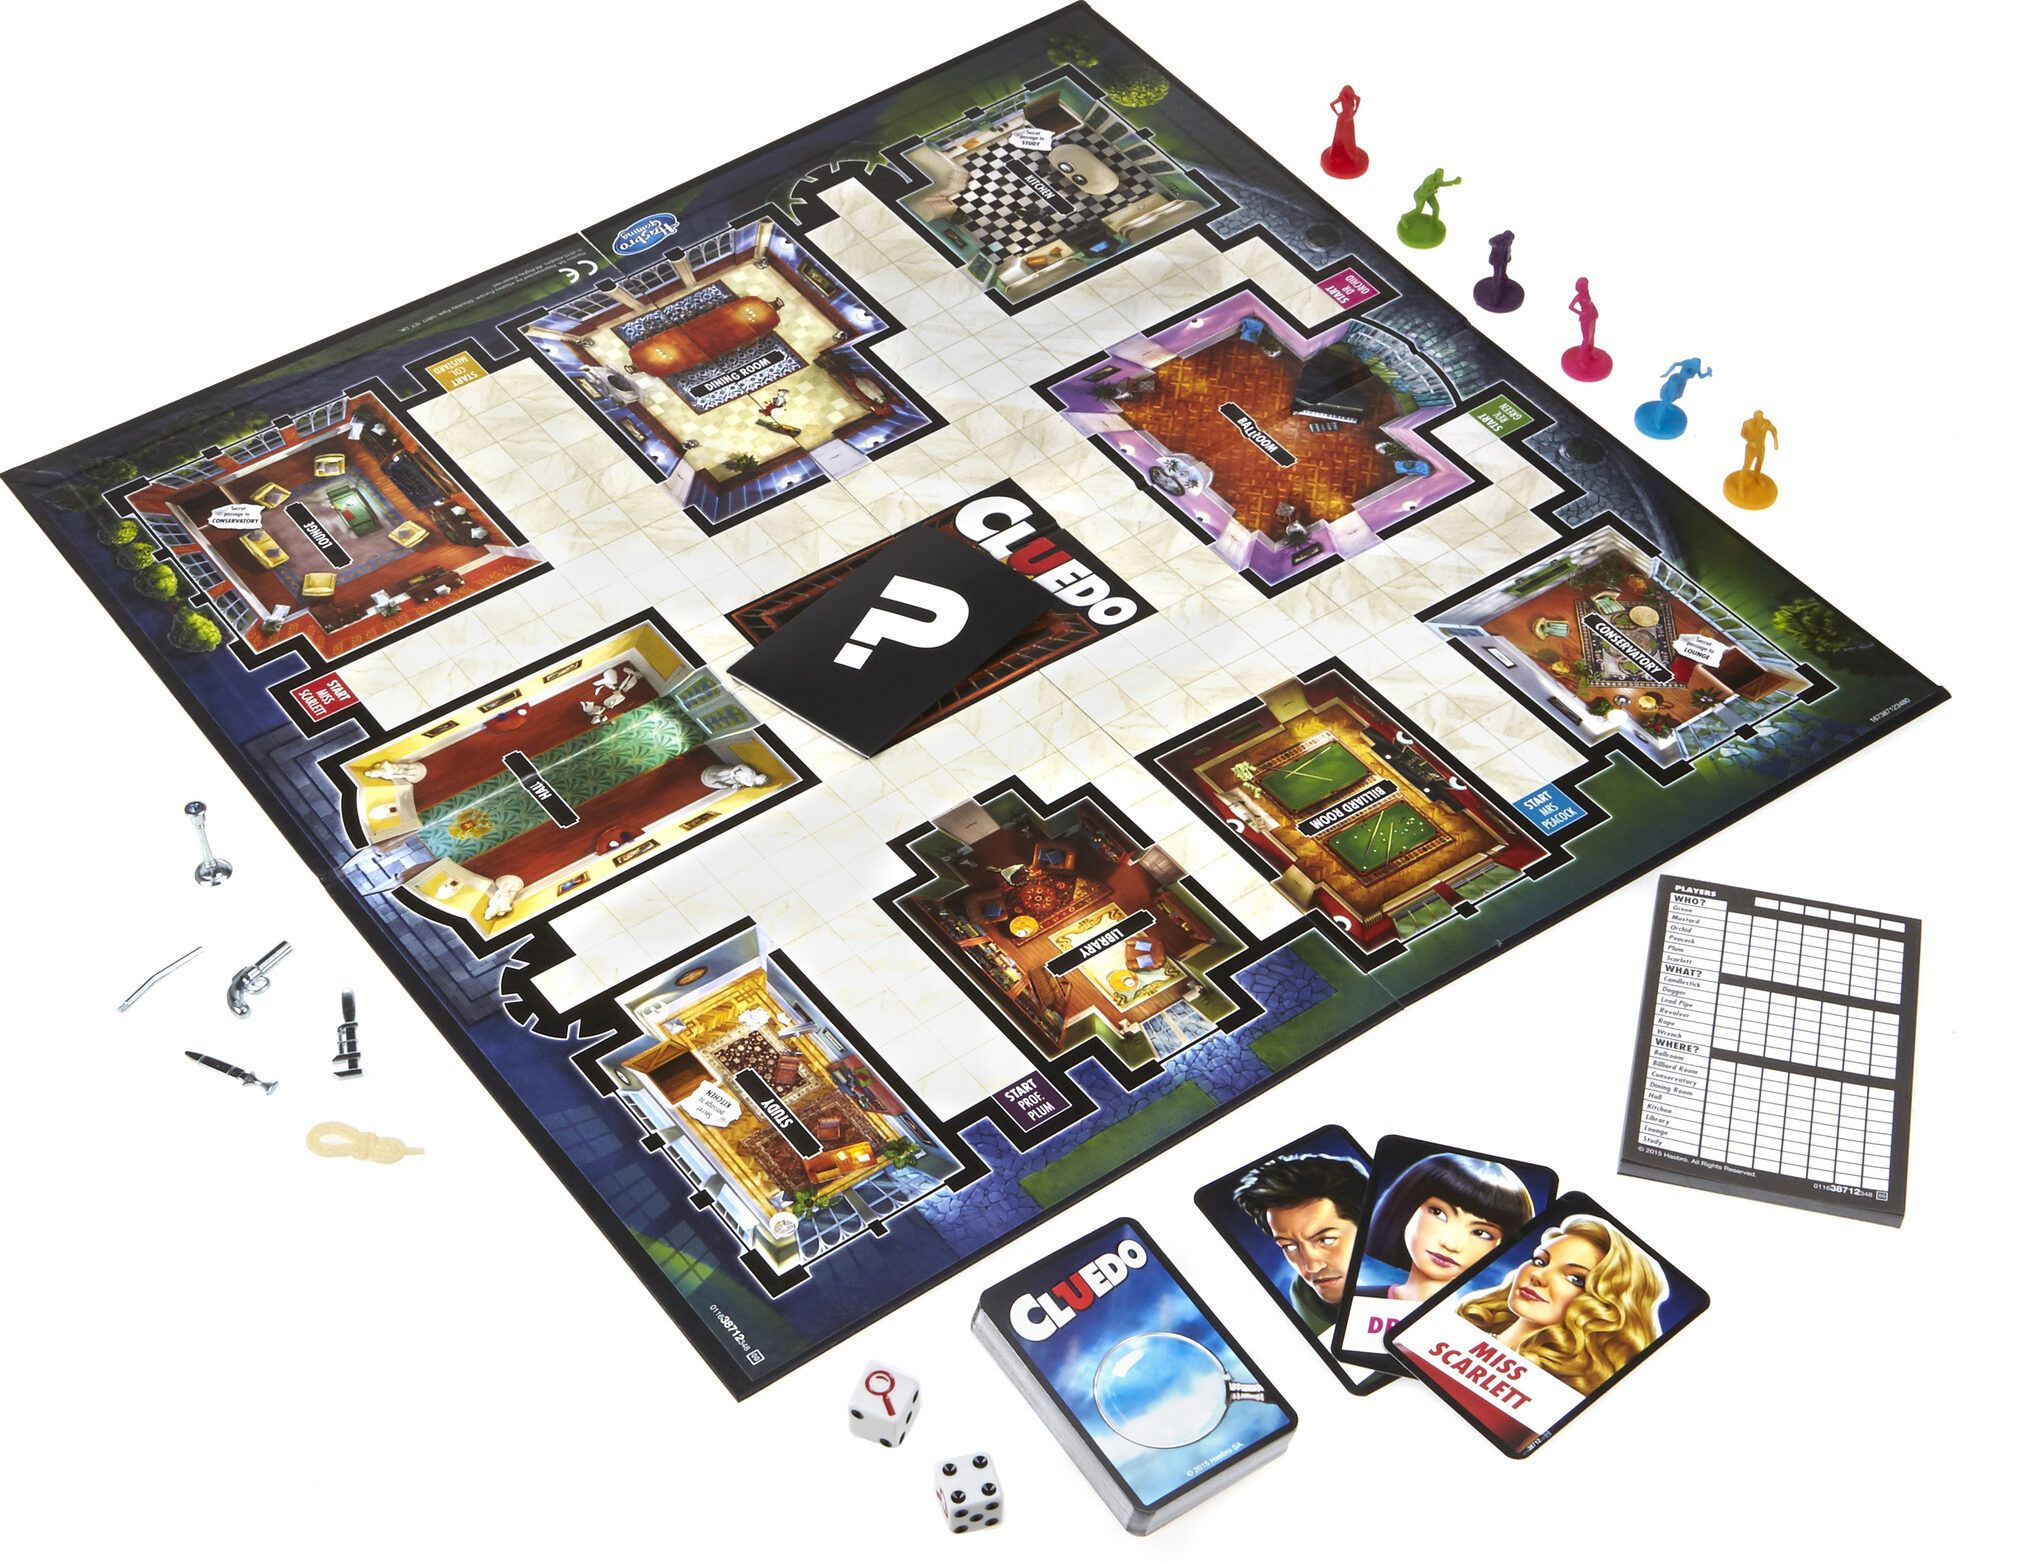 mystery board game for friends - play cluedo board game - hasbro games at The Toy Room